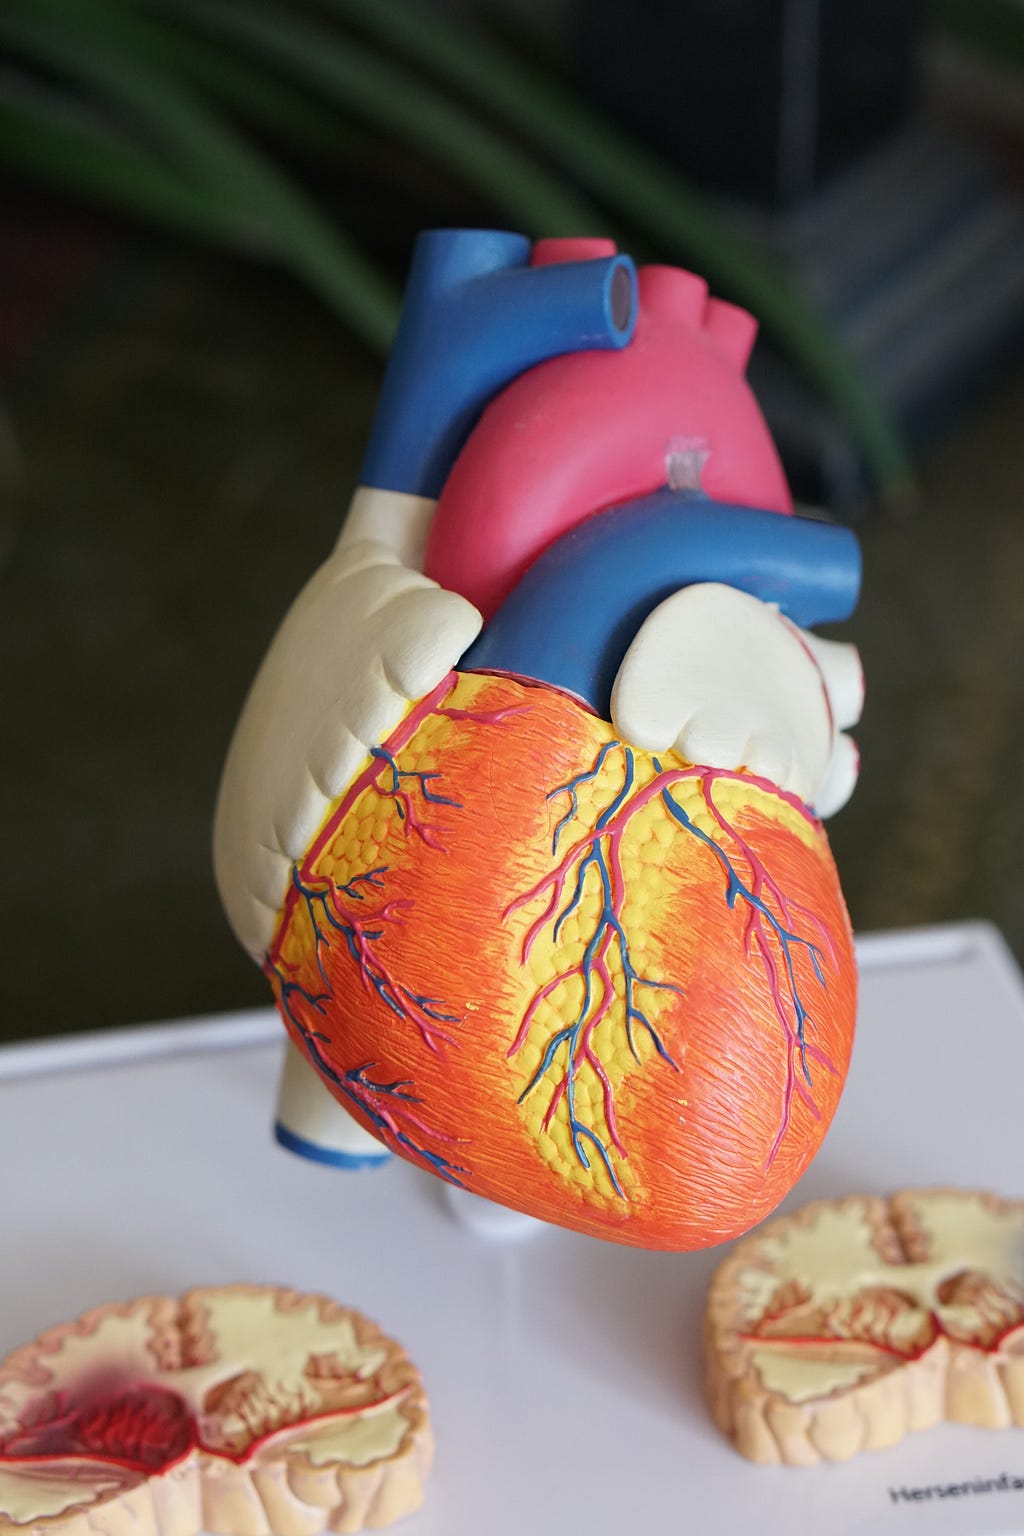 A photo of a model of the human heart.